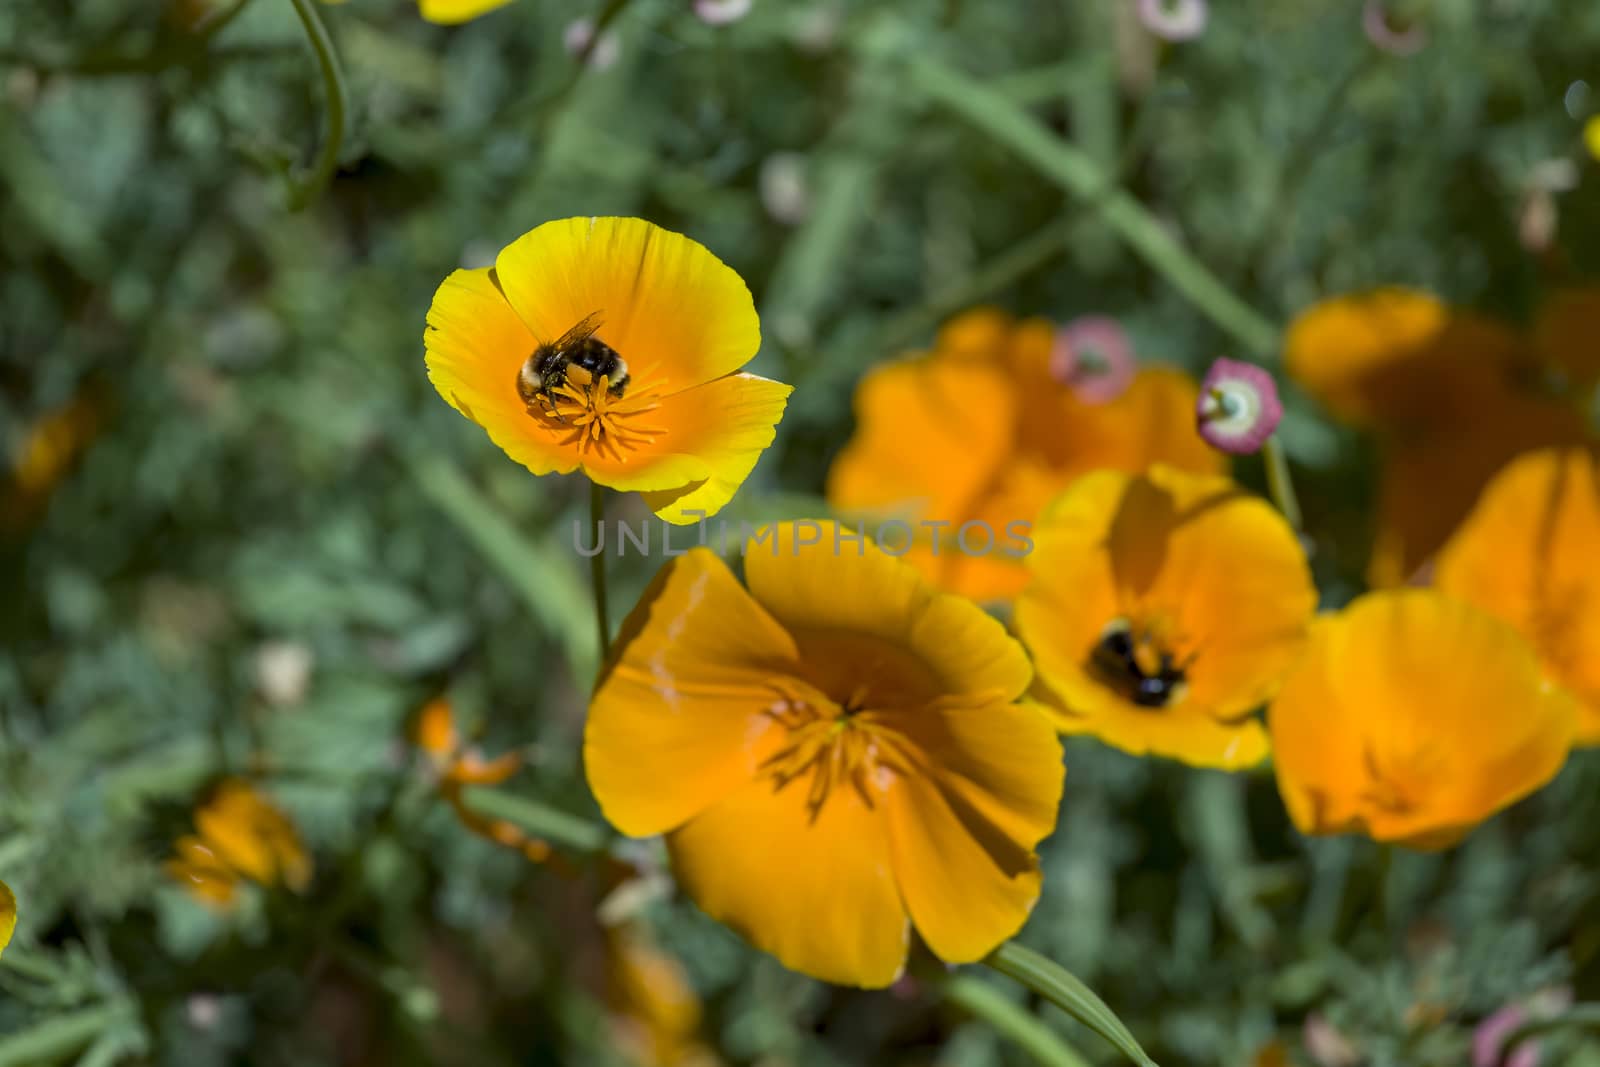 This photo was taken at a formal botanical garden near San Francisco, California. Spring had arrived, and flowers are in bloom. This image features a beautiful California Poppies and Bumble Bees collecting Pollen.